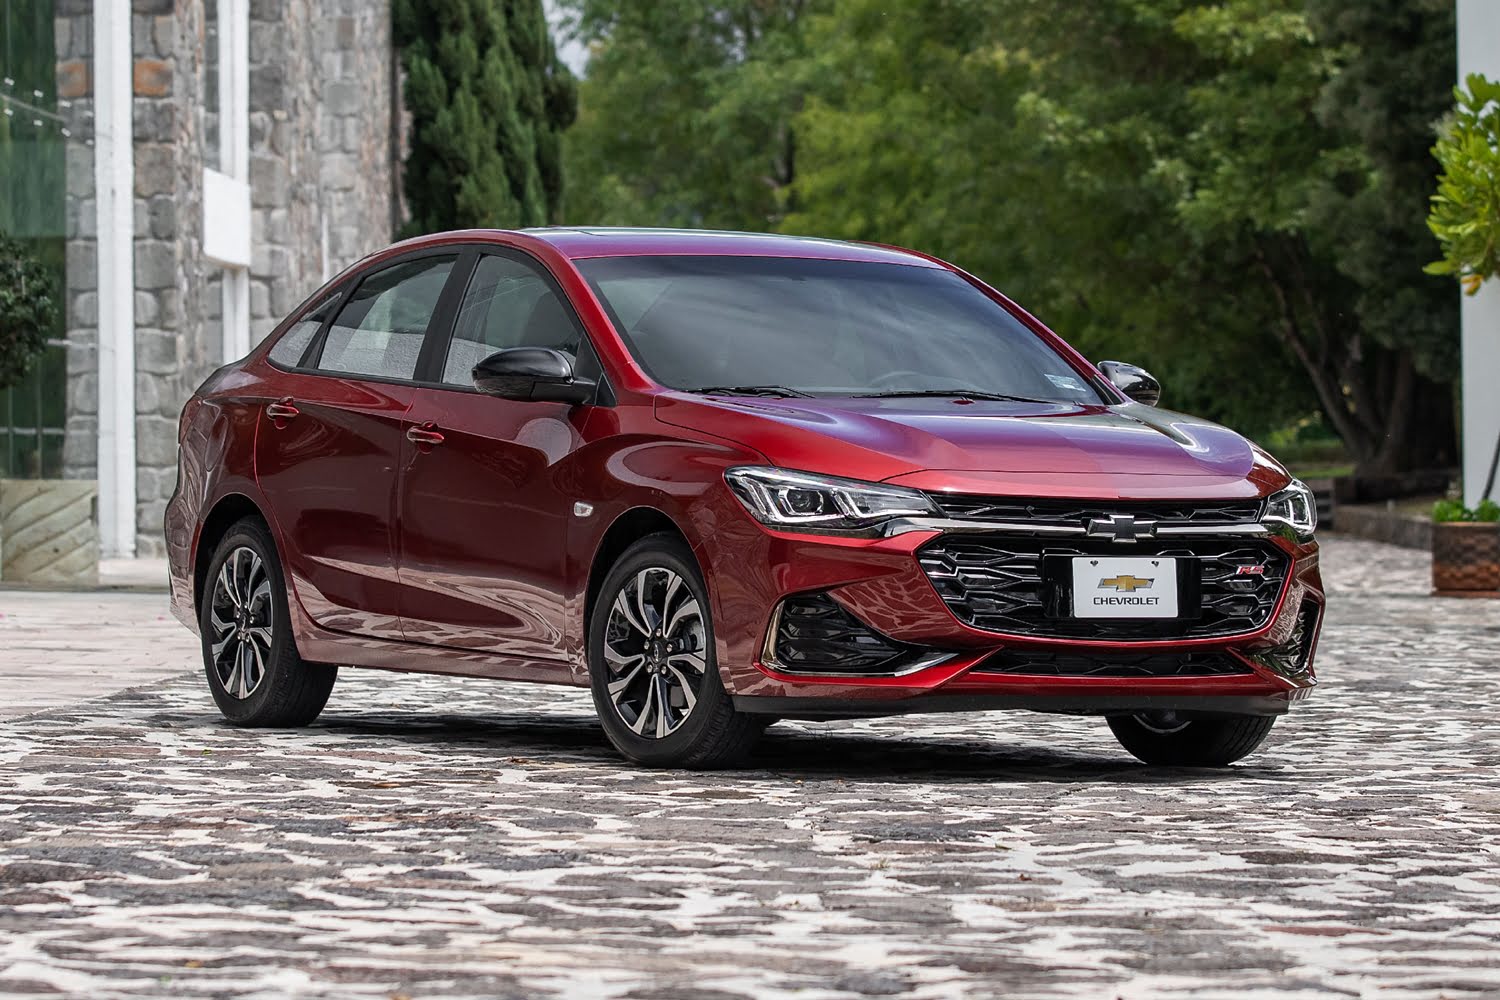 The New 2022 Chevy Cavalier Turbo Launches In Mexico